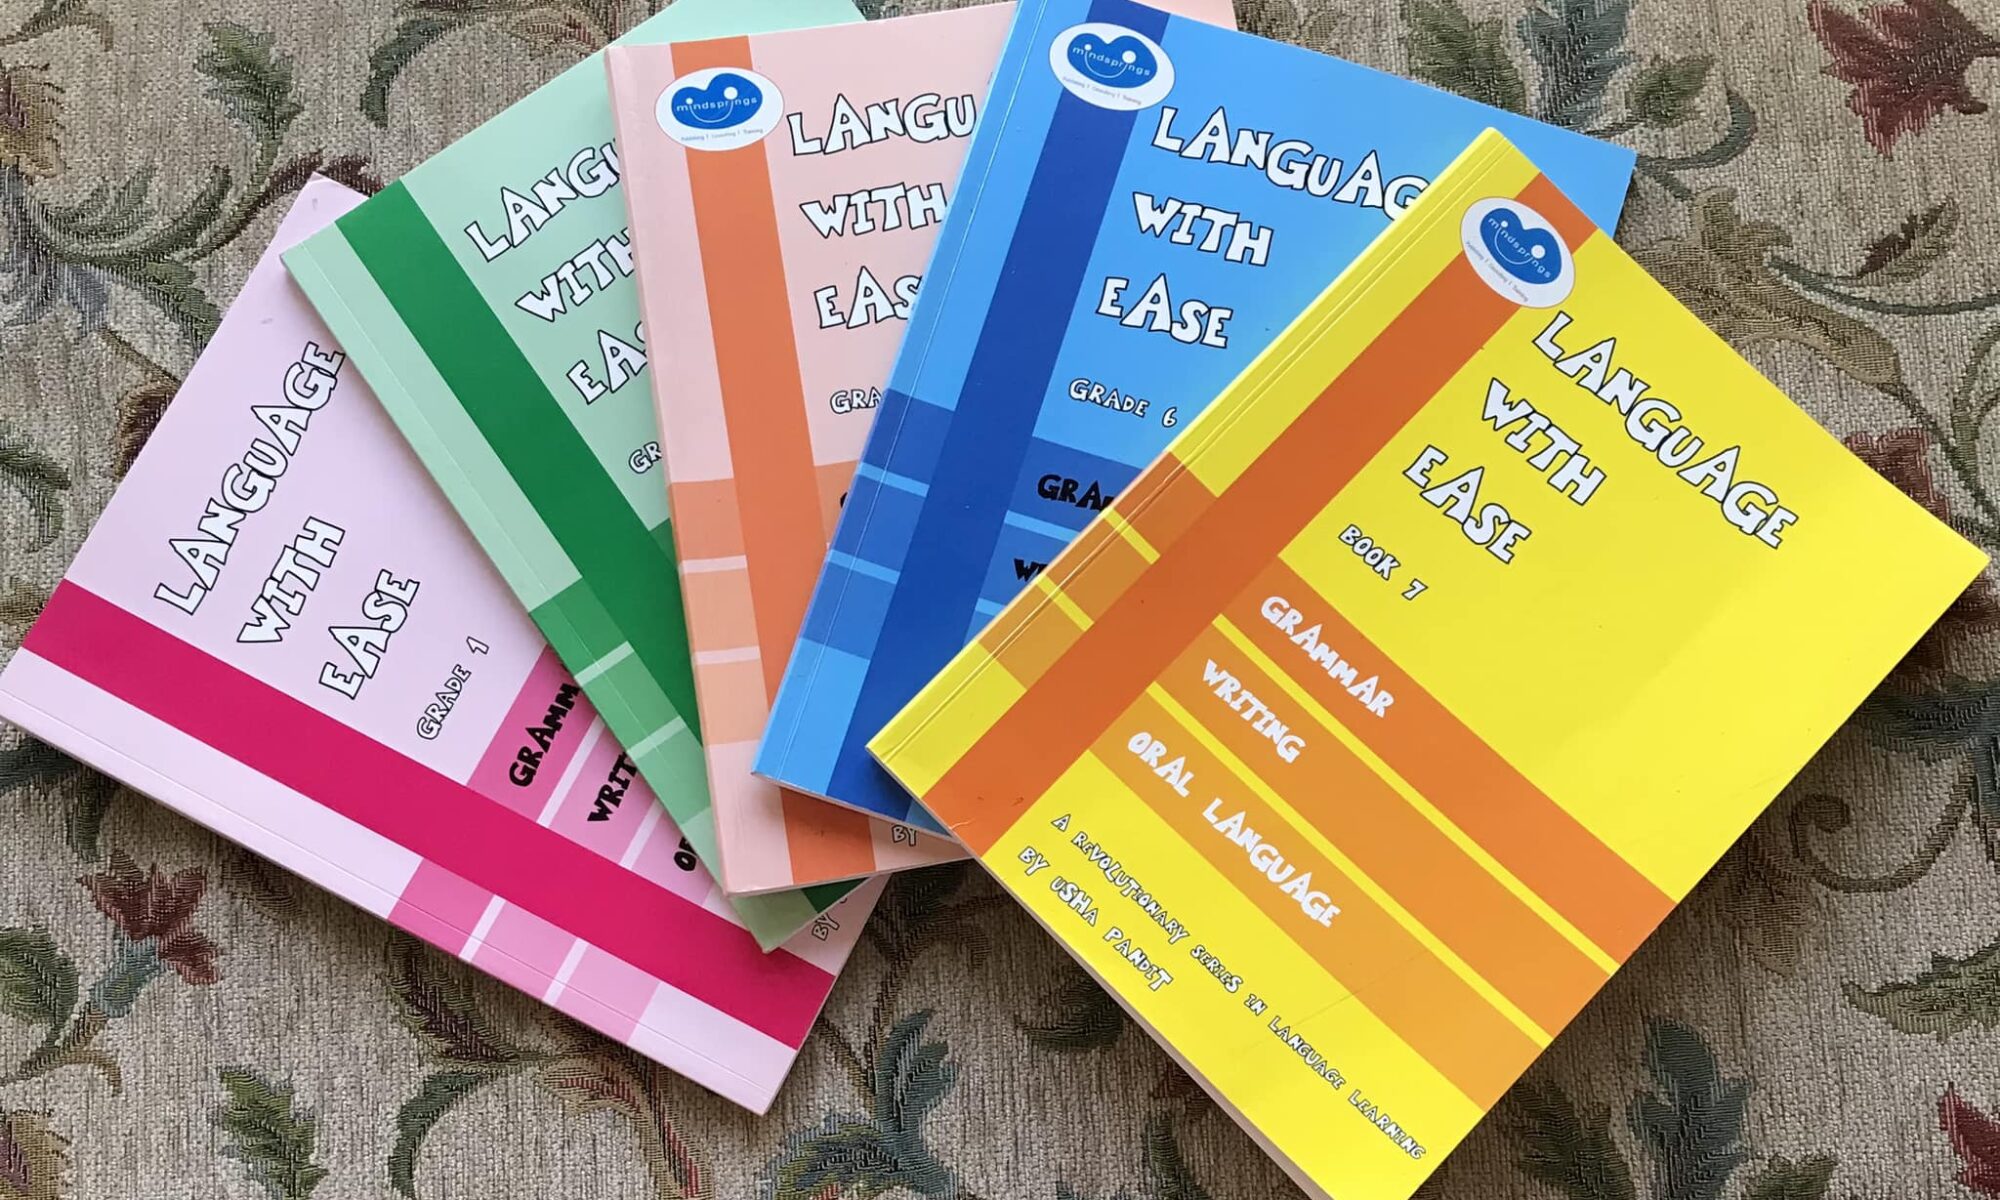 Language with Ease Books